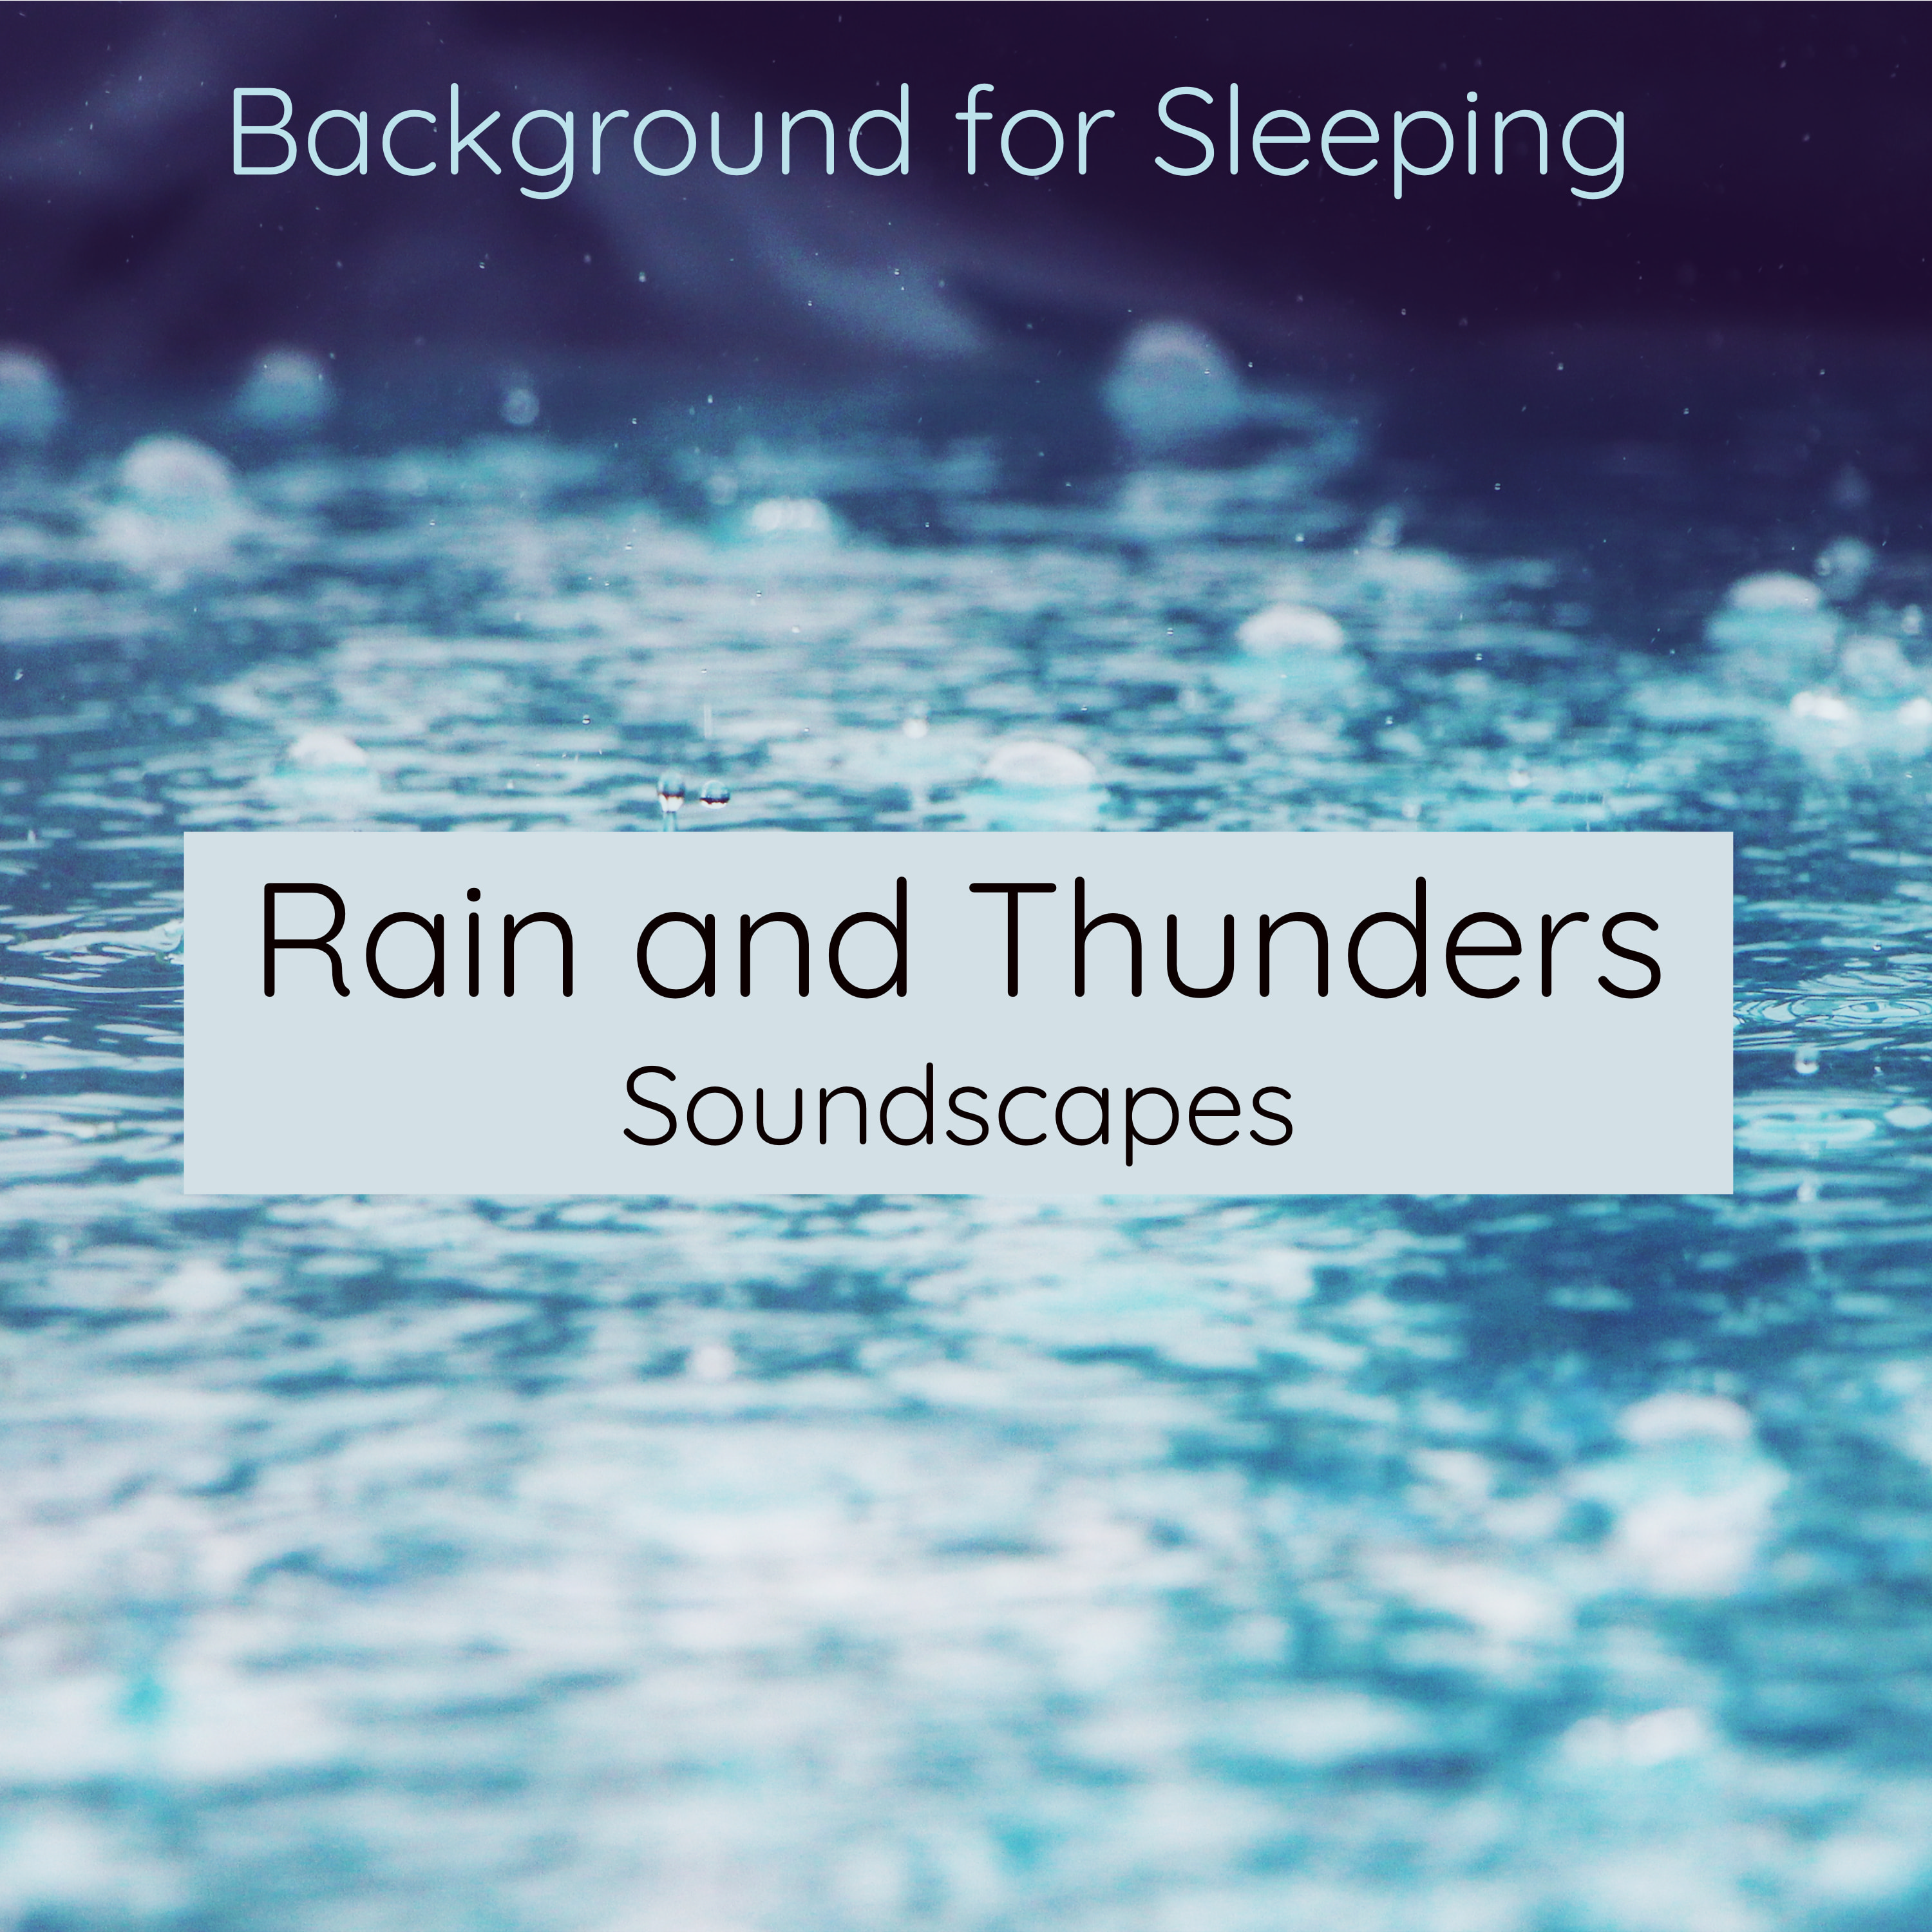 Rain and Thunders Soundscapes Background for Sleeping  One Hour Non Stop Nature Sounds Effect for Sleeping Disorders